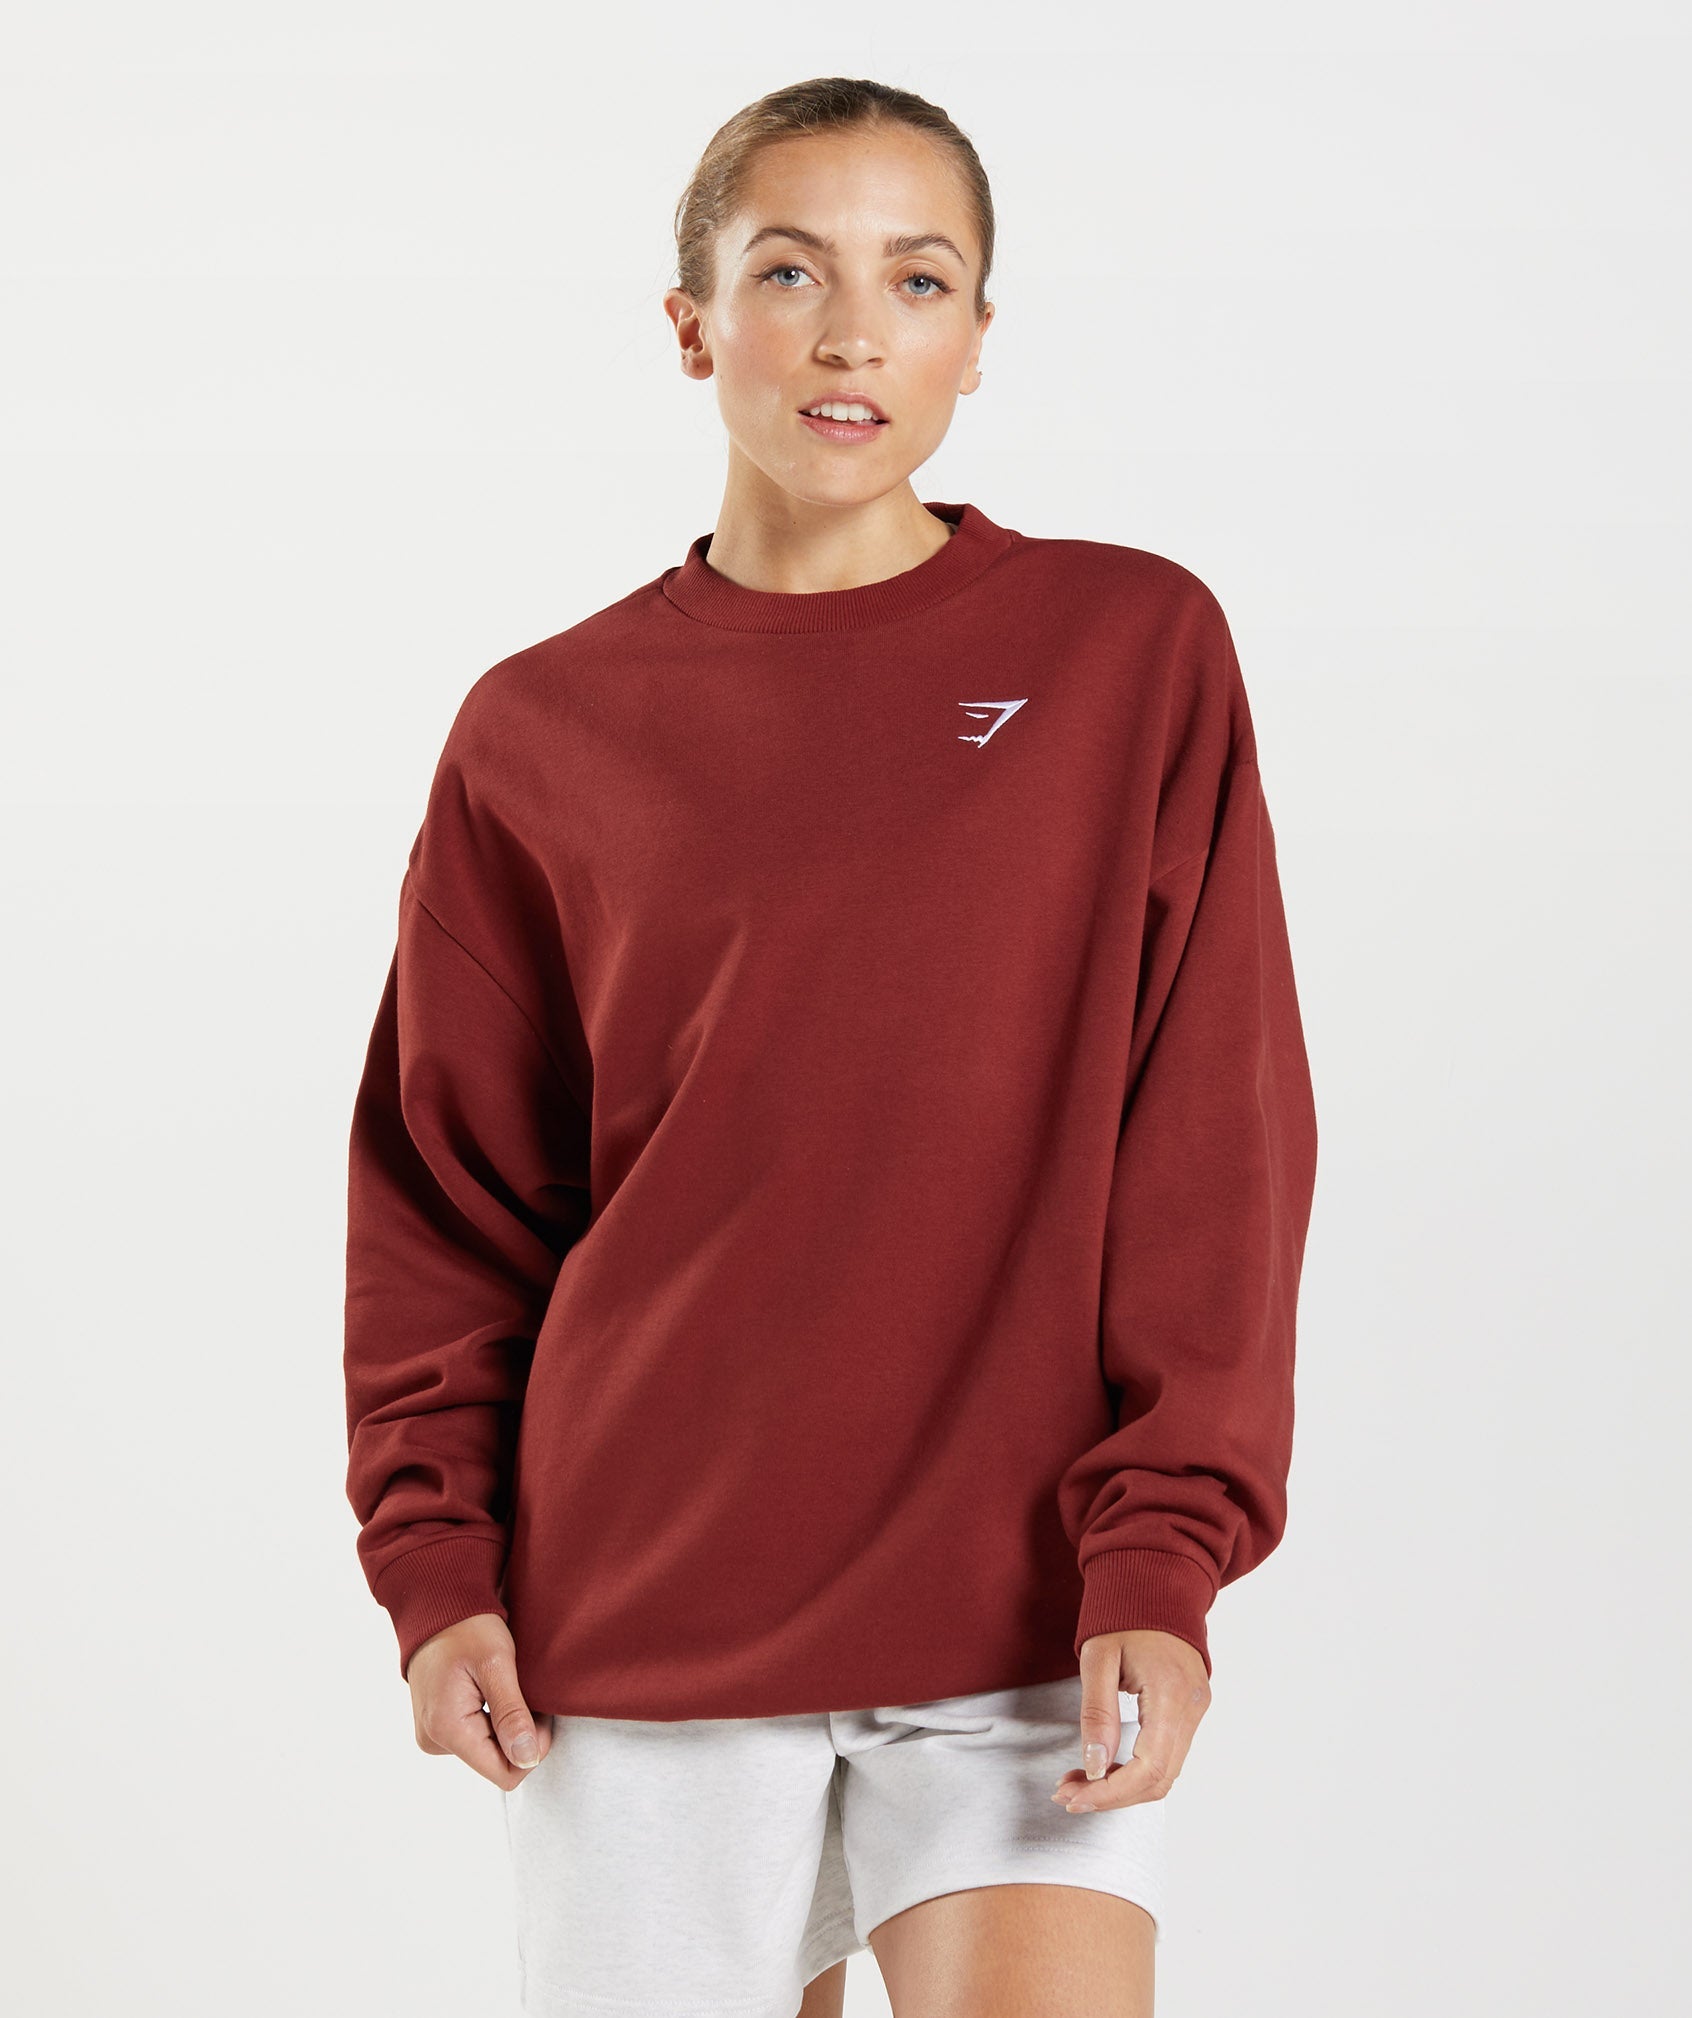 Training Oversized Sweatshirt in Rosewood Red - view 1